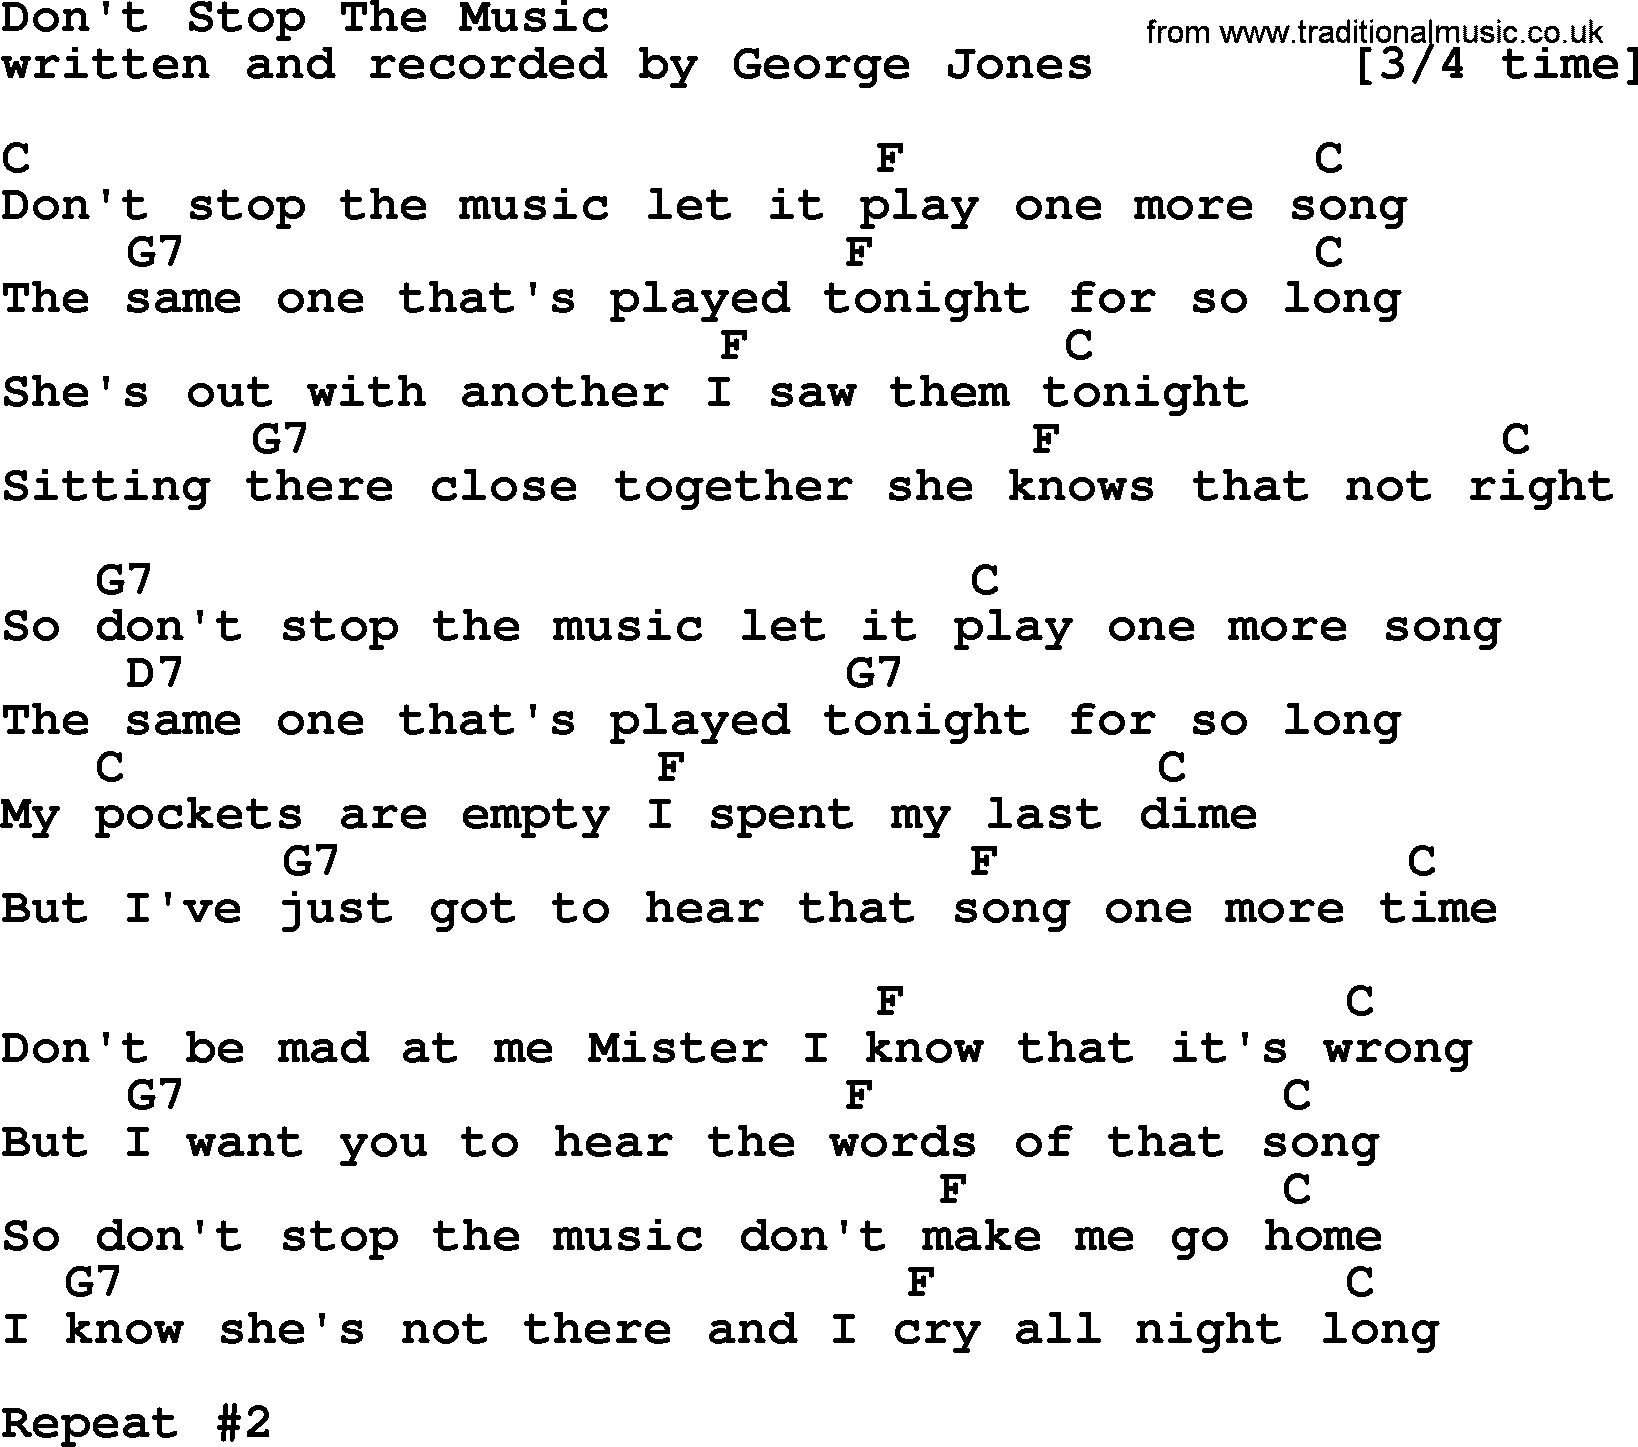 George Jones song: Don't Stop The Music, lyrics and chords